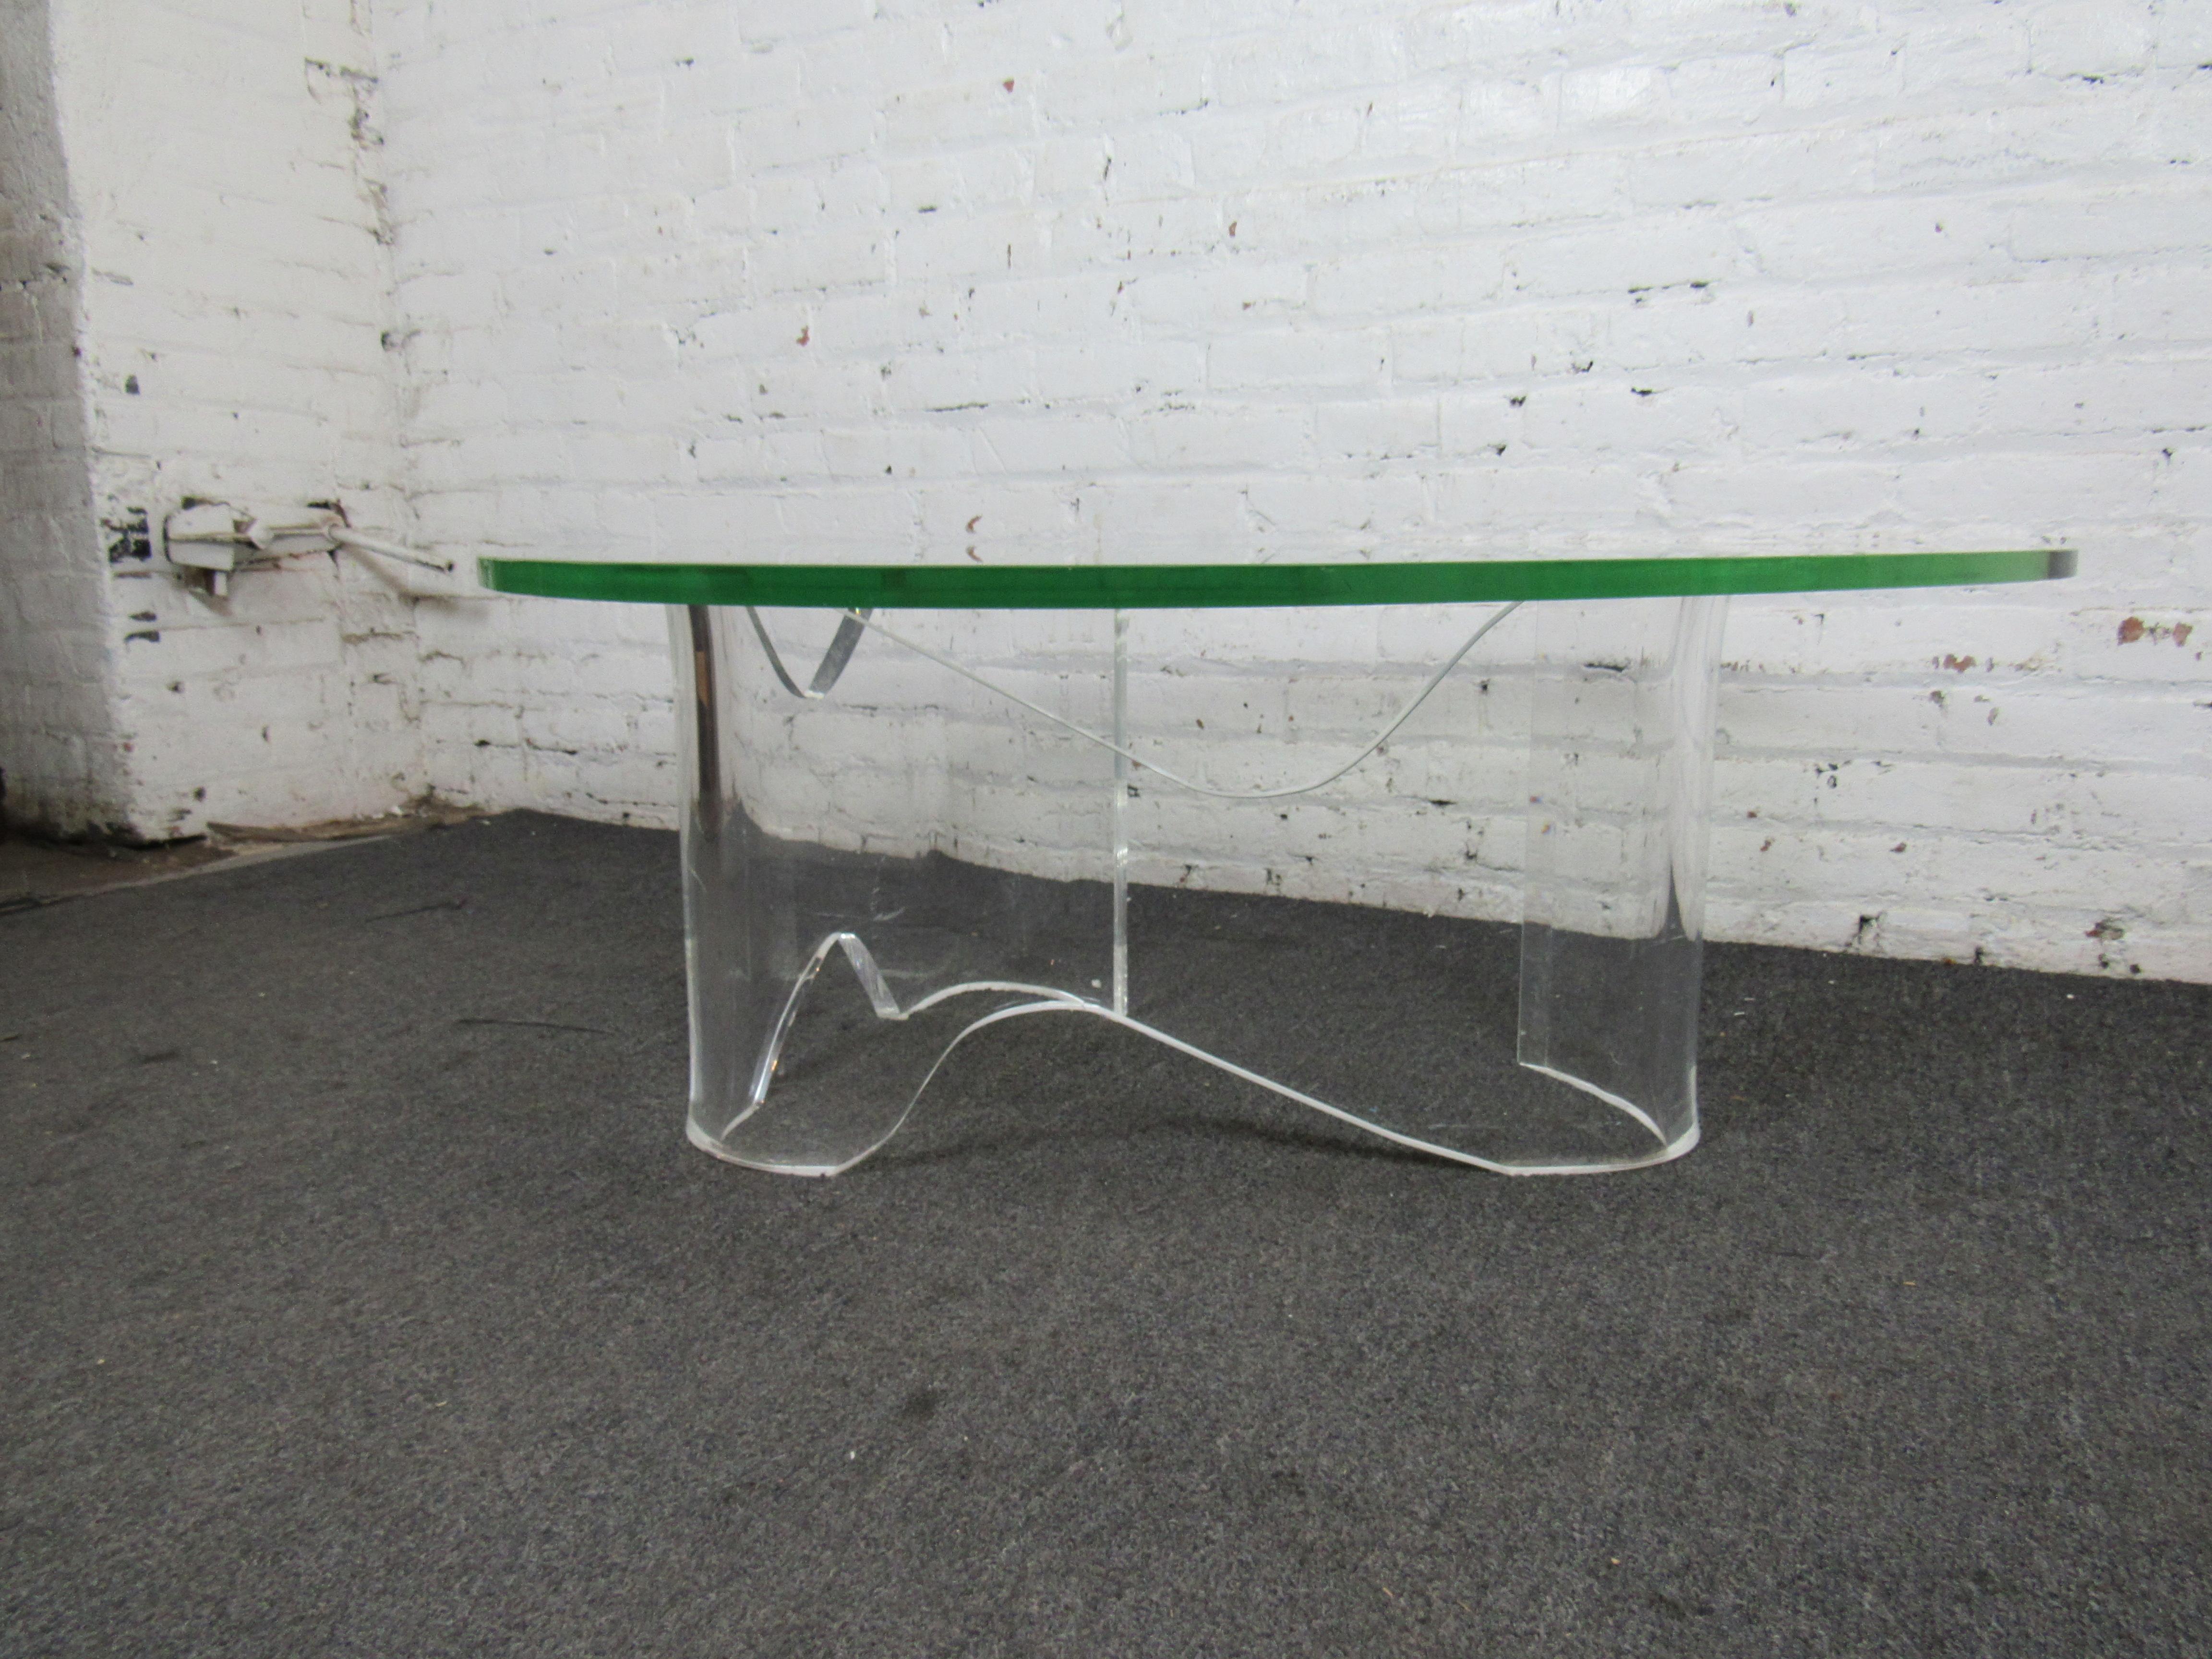 A curving lucite base and thick glass top make this vintage coffee table unique and stylish. Please confirm item location with seller (NY/NJ).